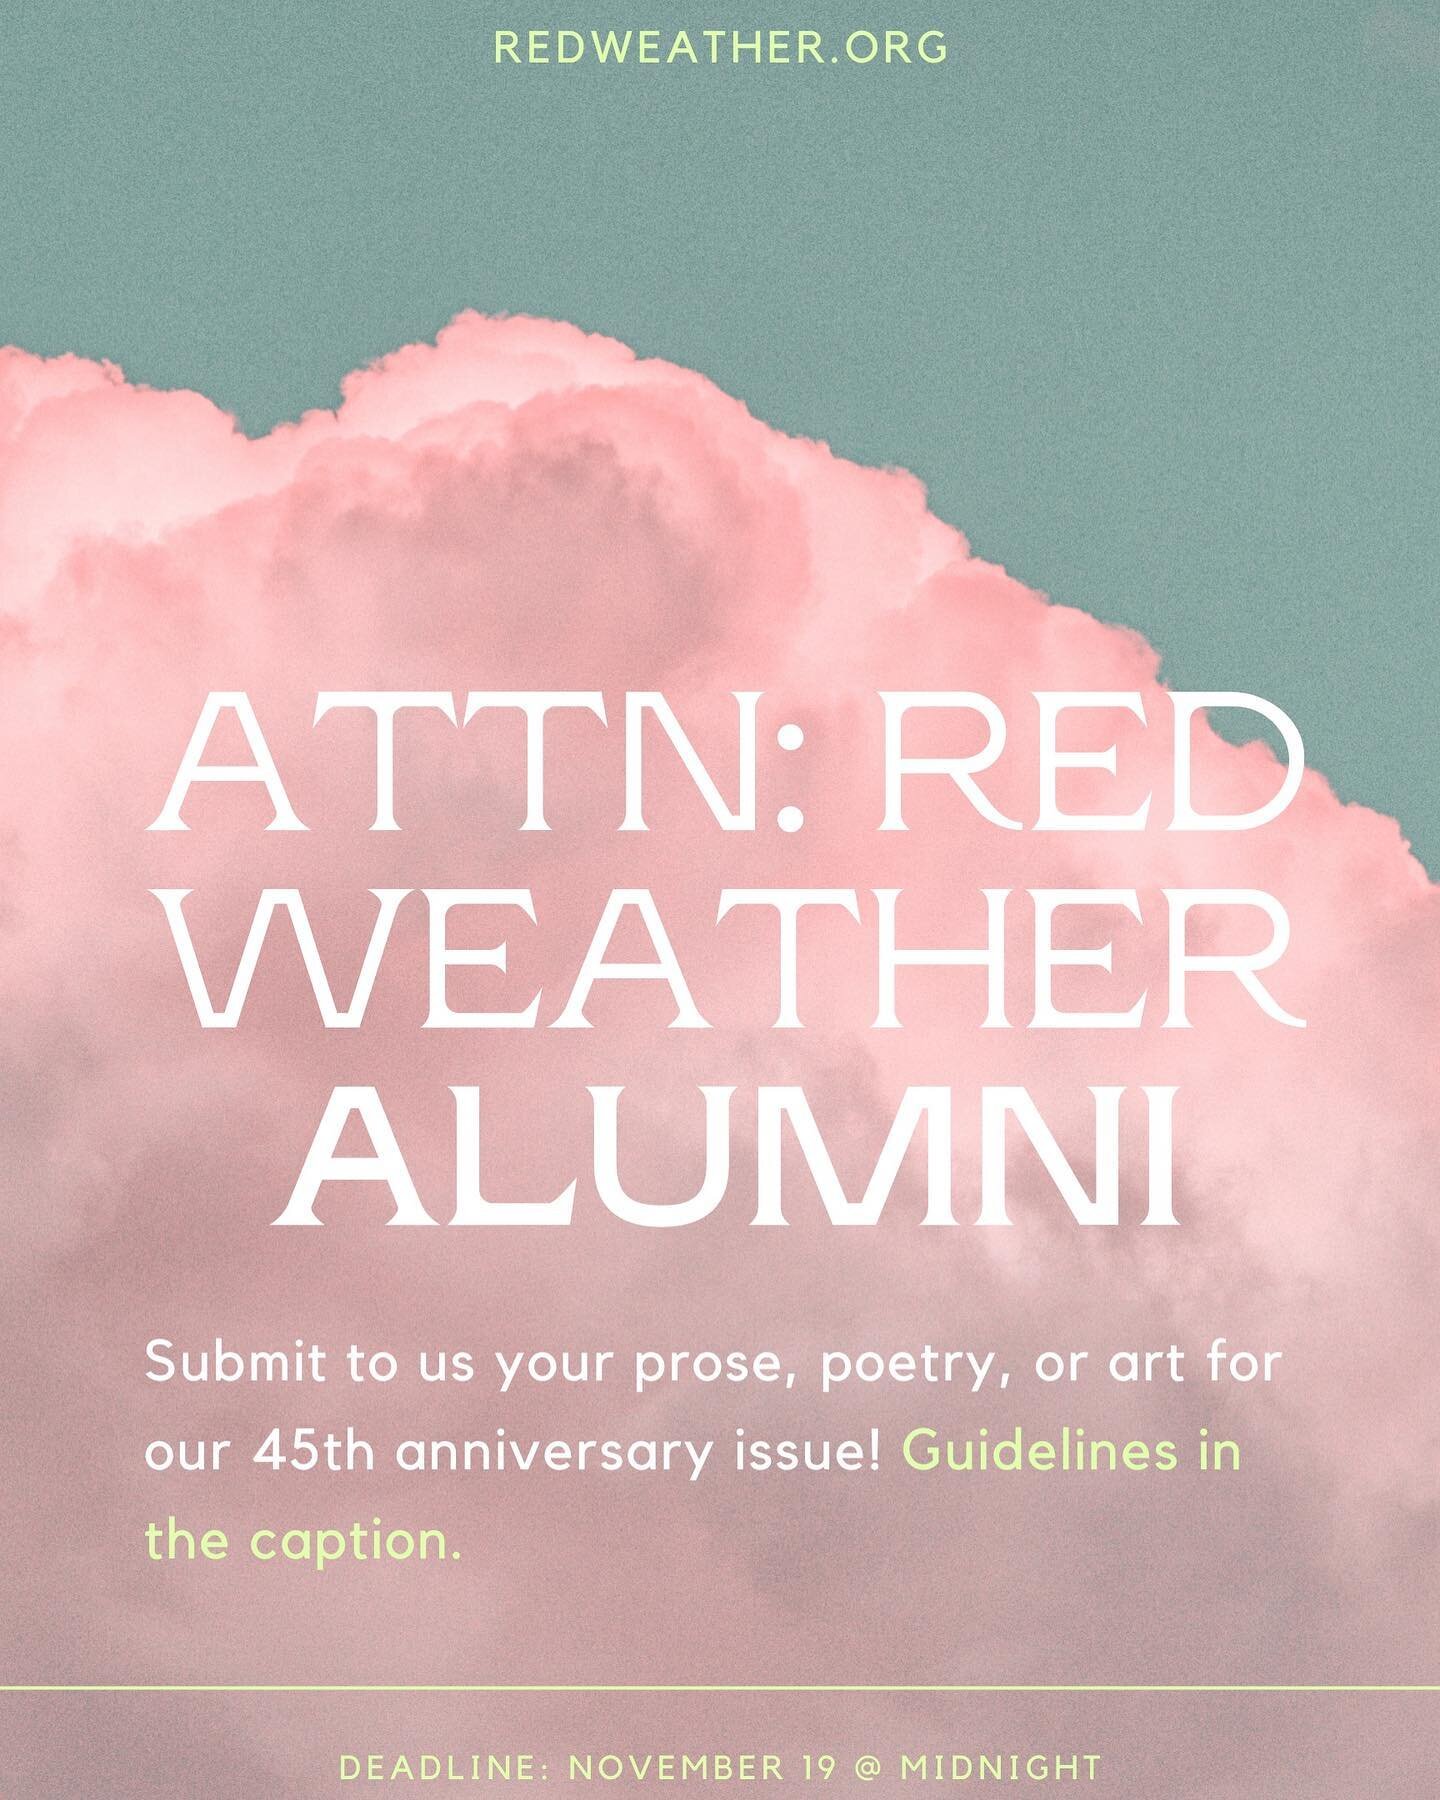 To celebrate Red Weather&rsquo;s 45th anniversary, we are seeking alumni submissions to publish alongside student work for this fall issue! Alumni and student work are evaluated separately.

Guidelines: please send only ONE piece per category (poetry